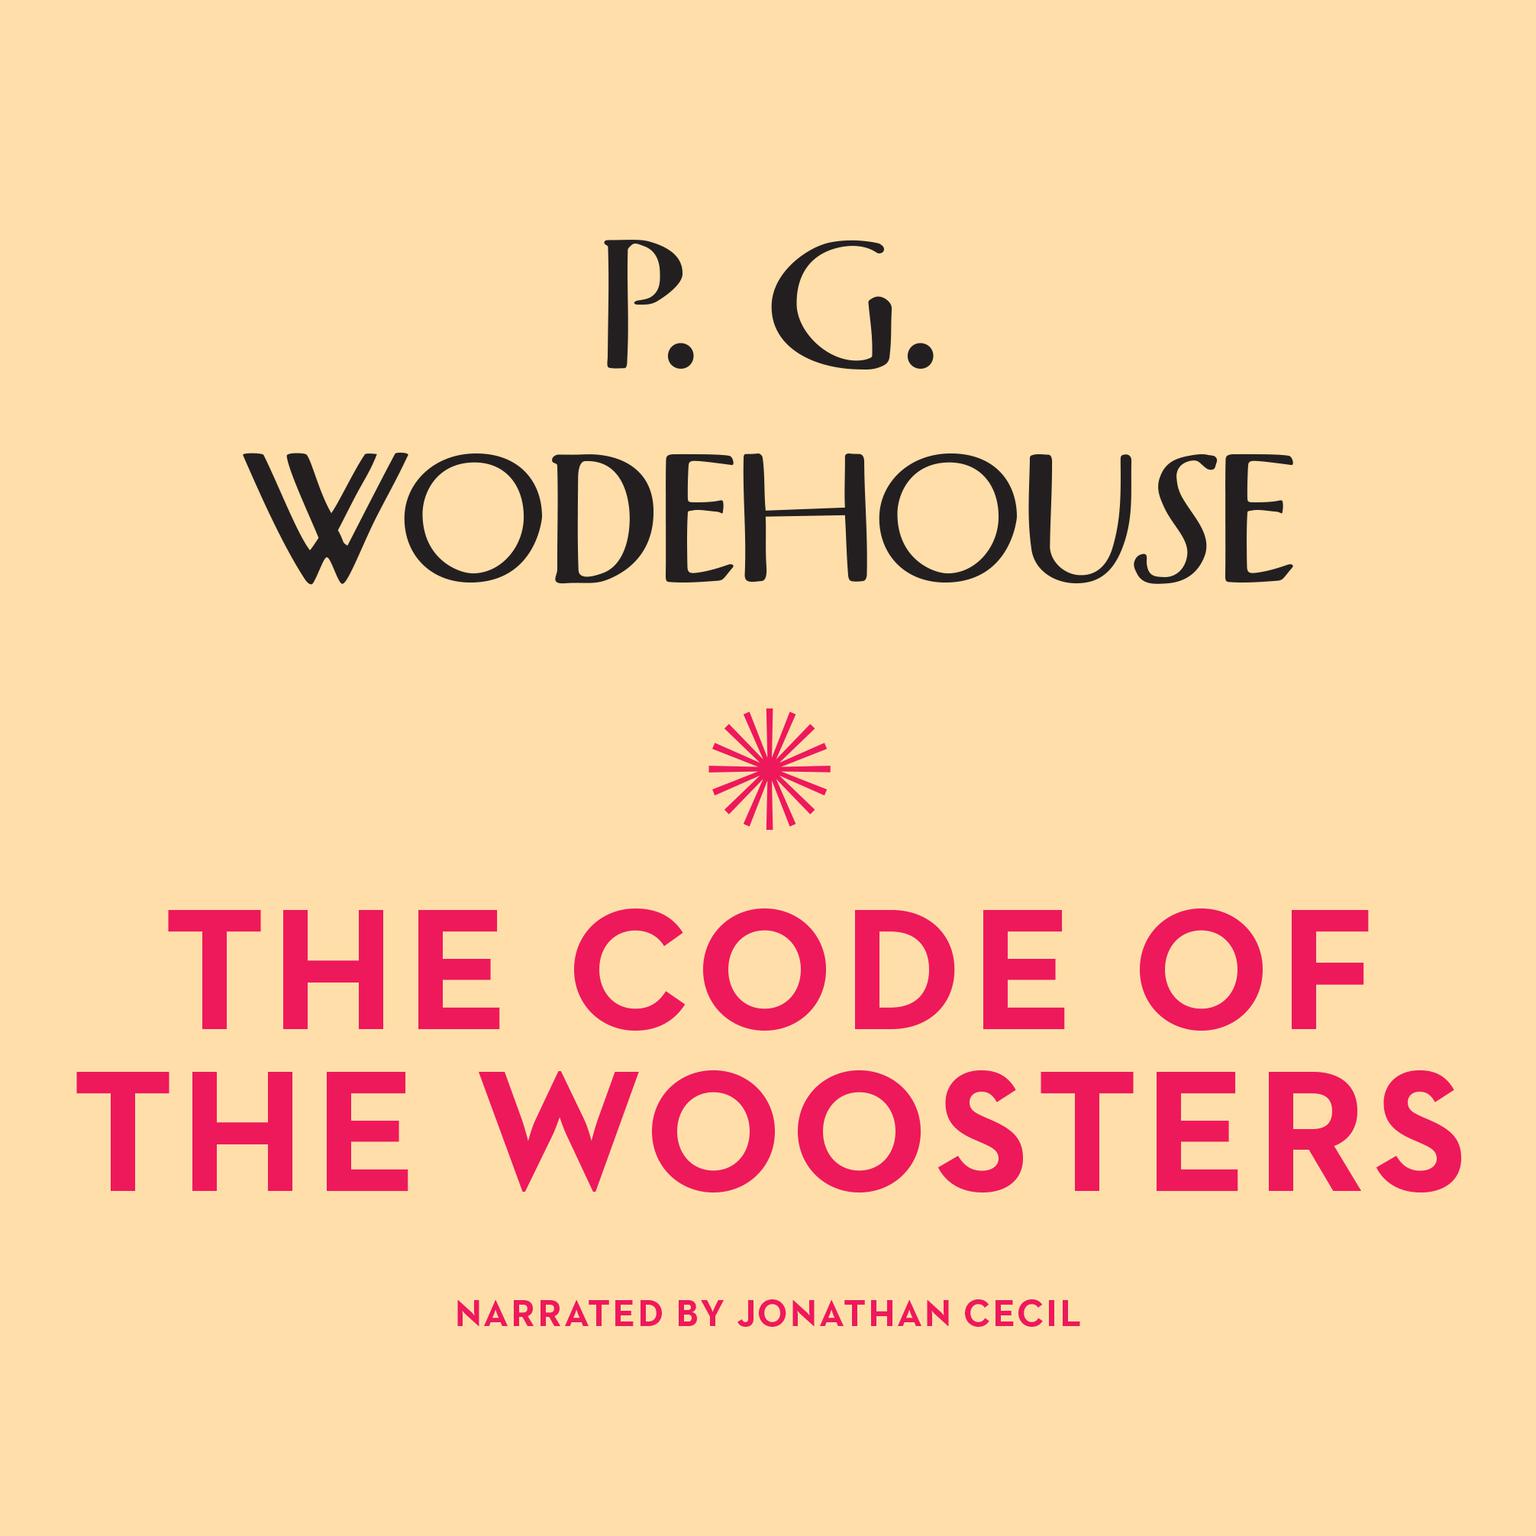 The Code of the Woosters Audiobook, by P. G. Wodehouse